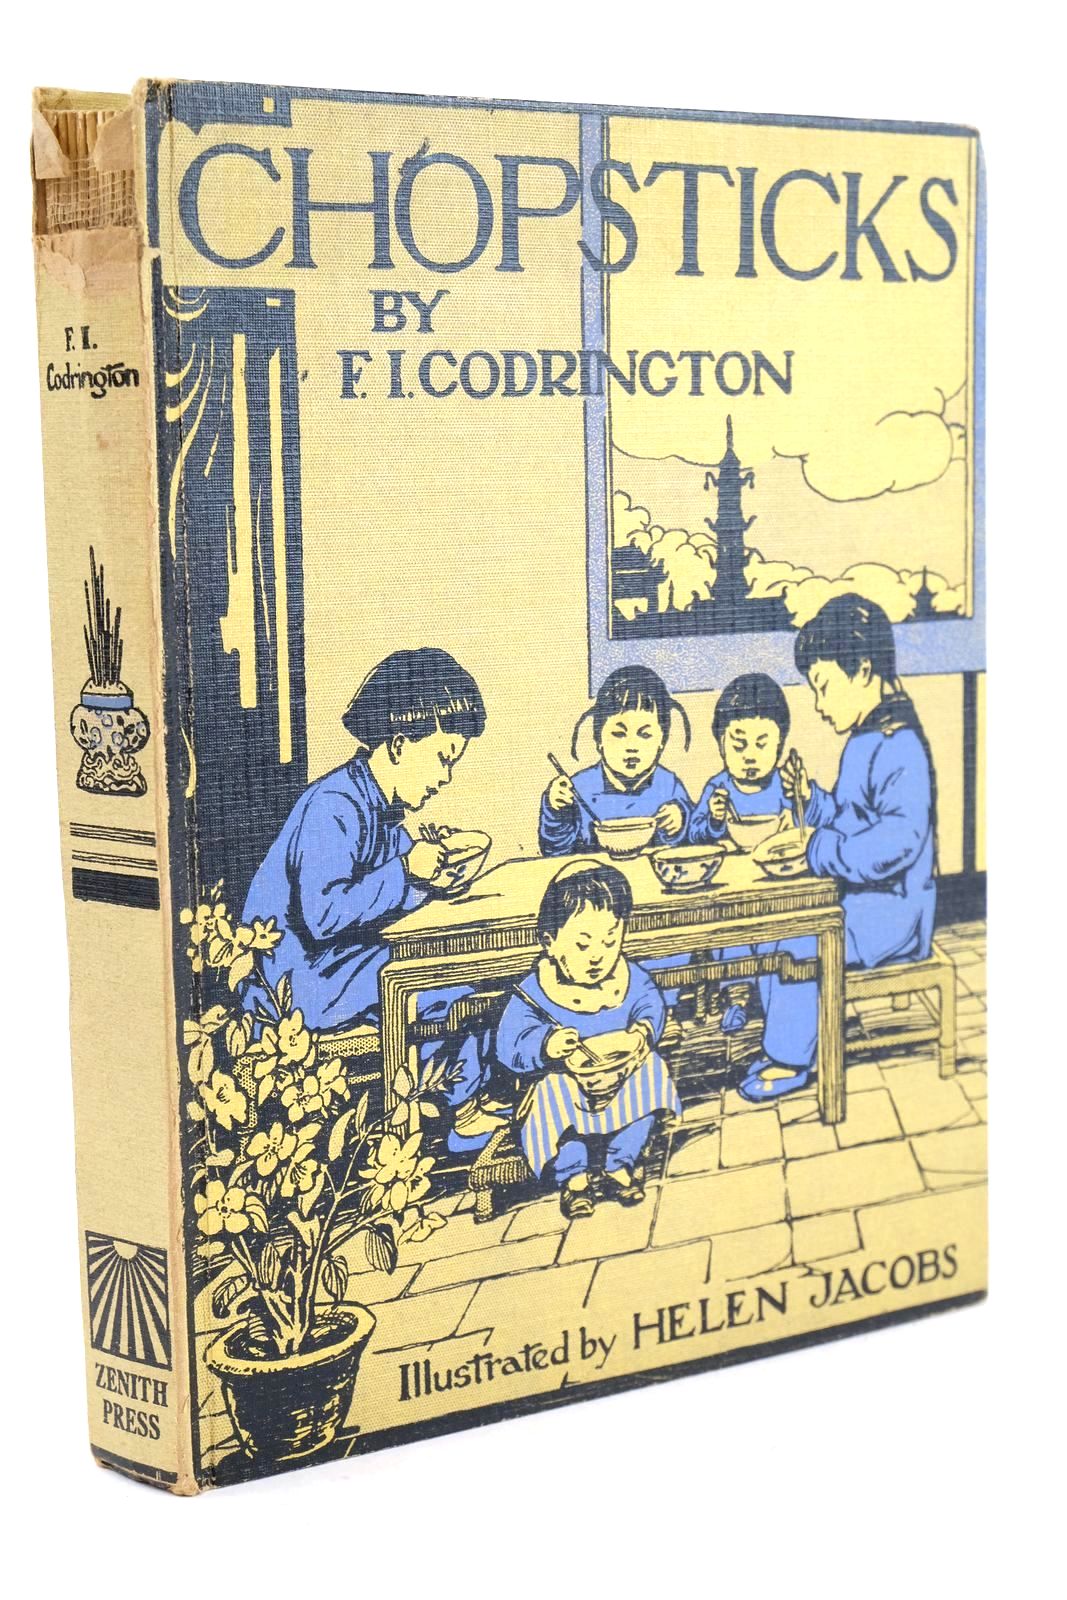 Photo of CHOPSTICKS written by Codrington, F.I. illustrated by Jacobs, Helen published by Zenith Press (STOCK CODE: 1324899)  for sale by Stella & Rose's Books